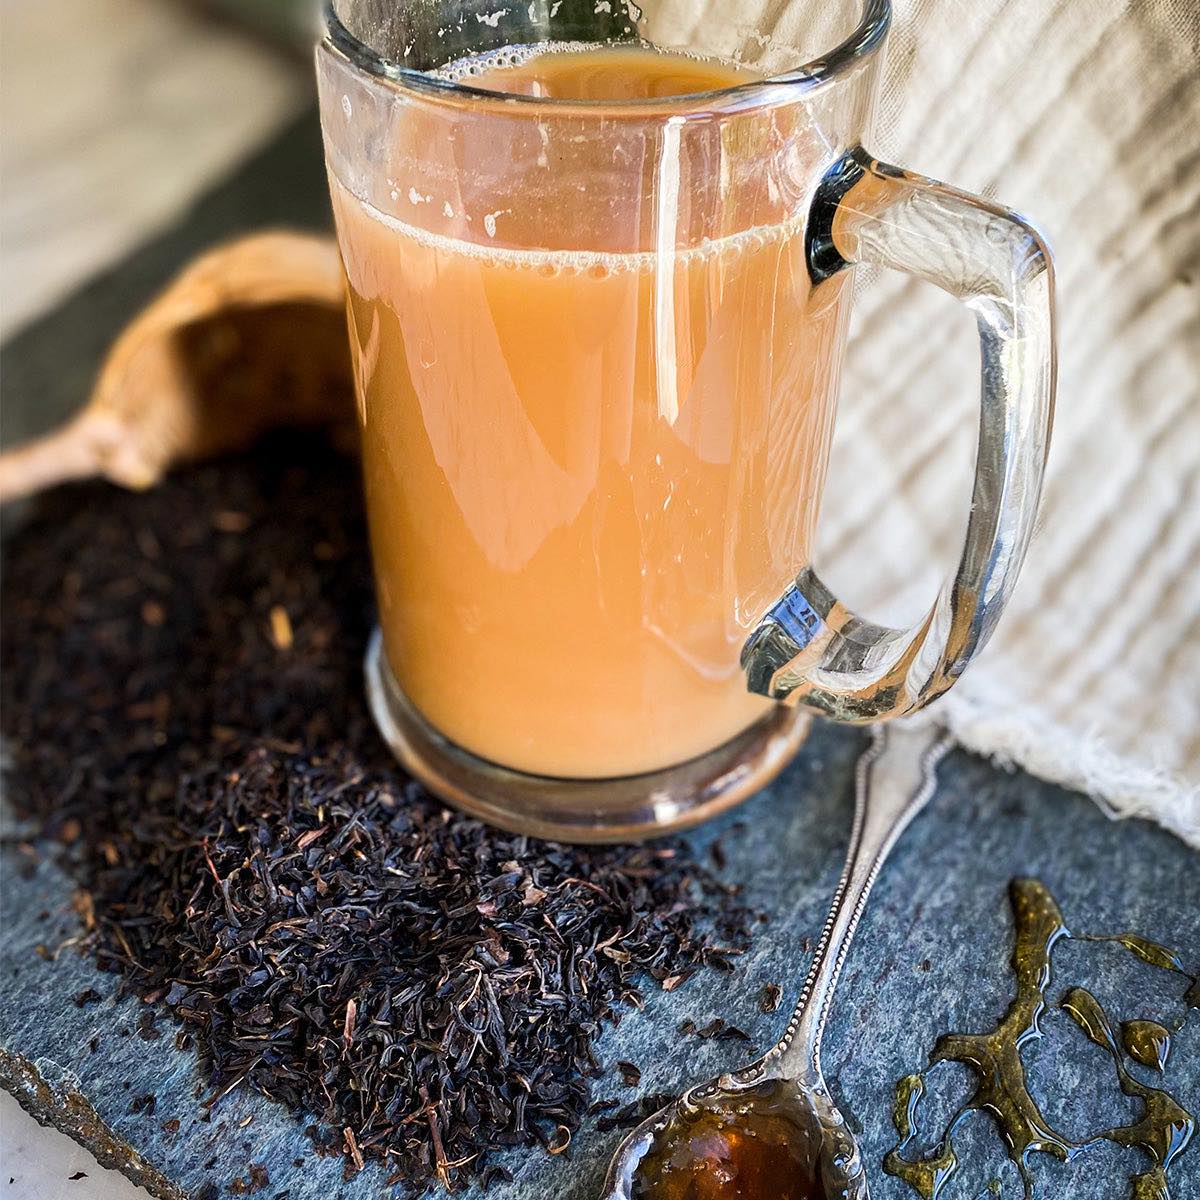 Brewed black keemun tea with cream in a glass mug with the dried tea surrounding it on the table.